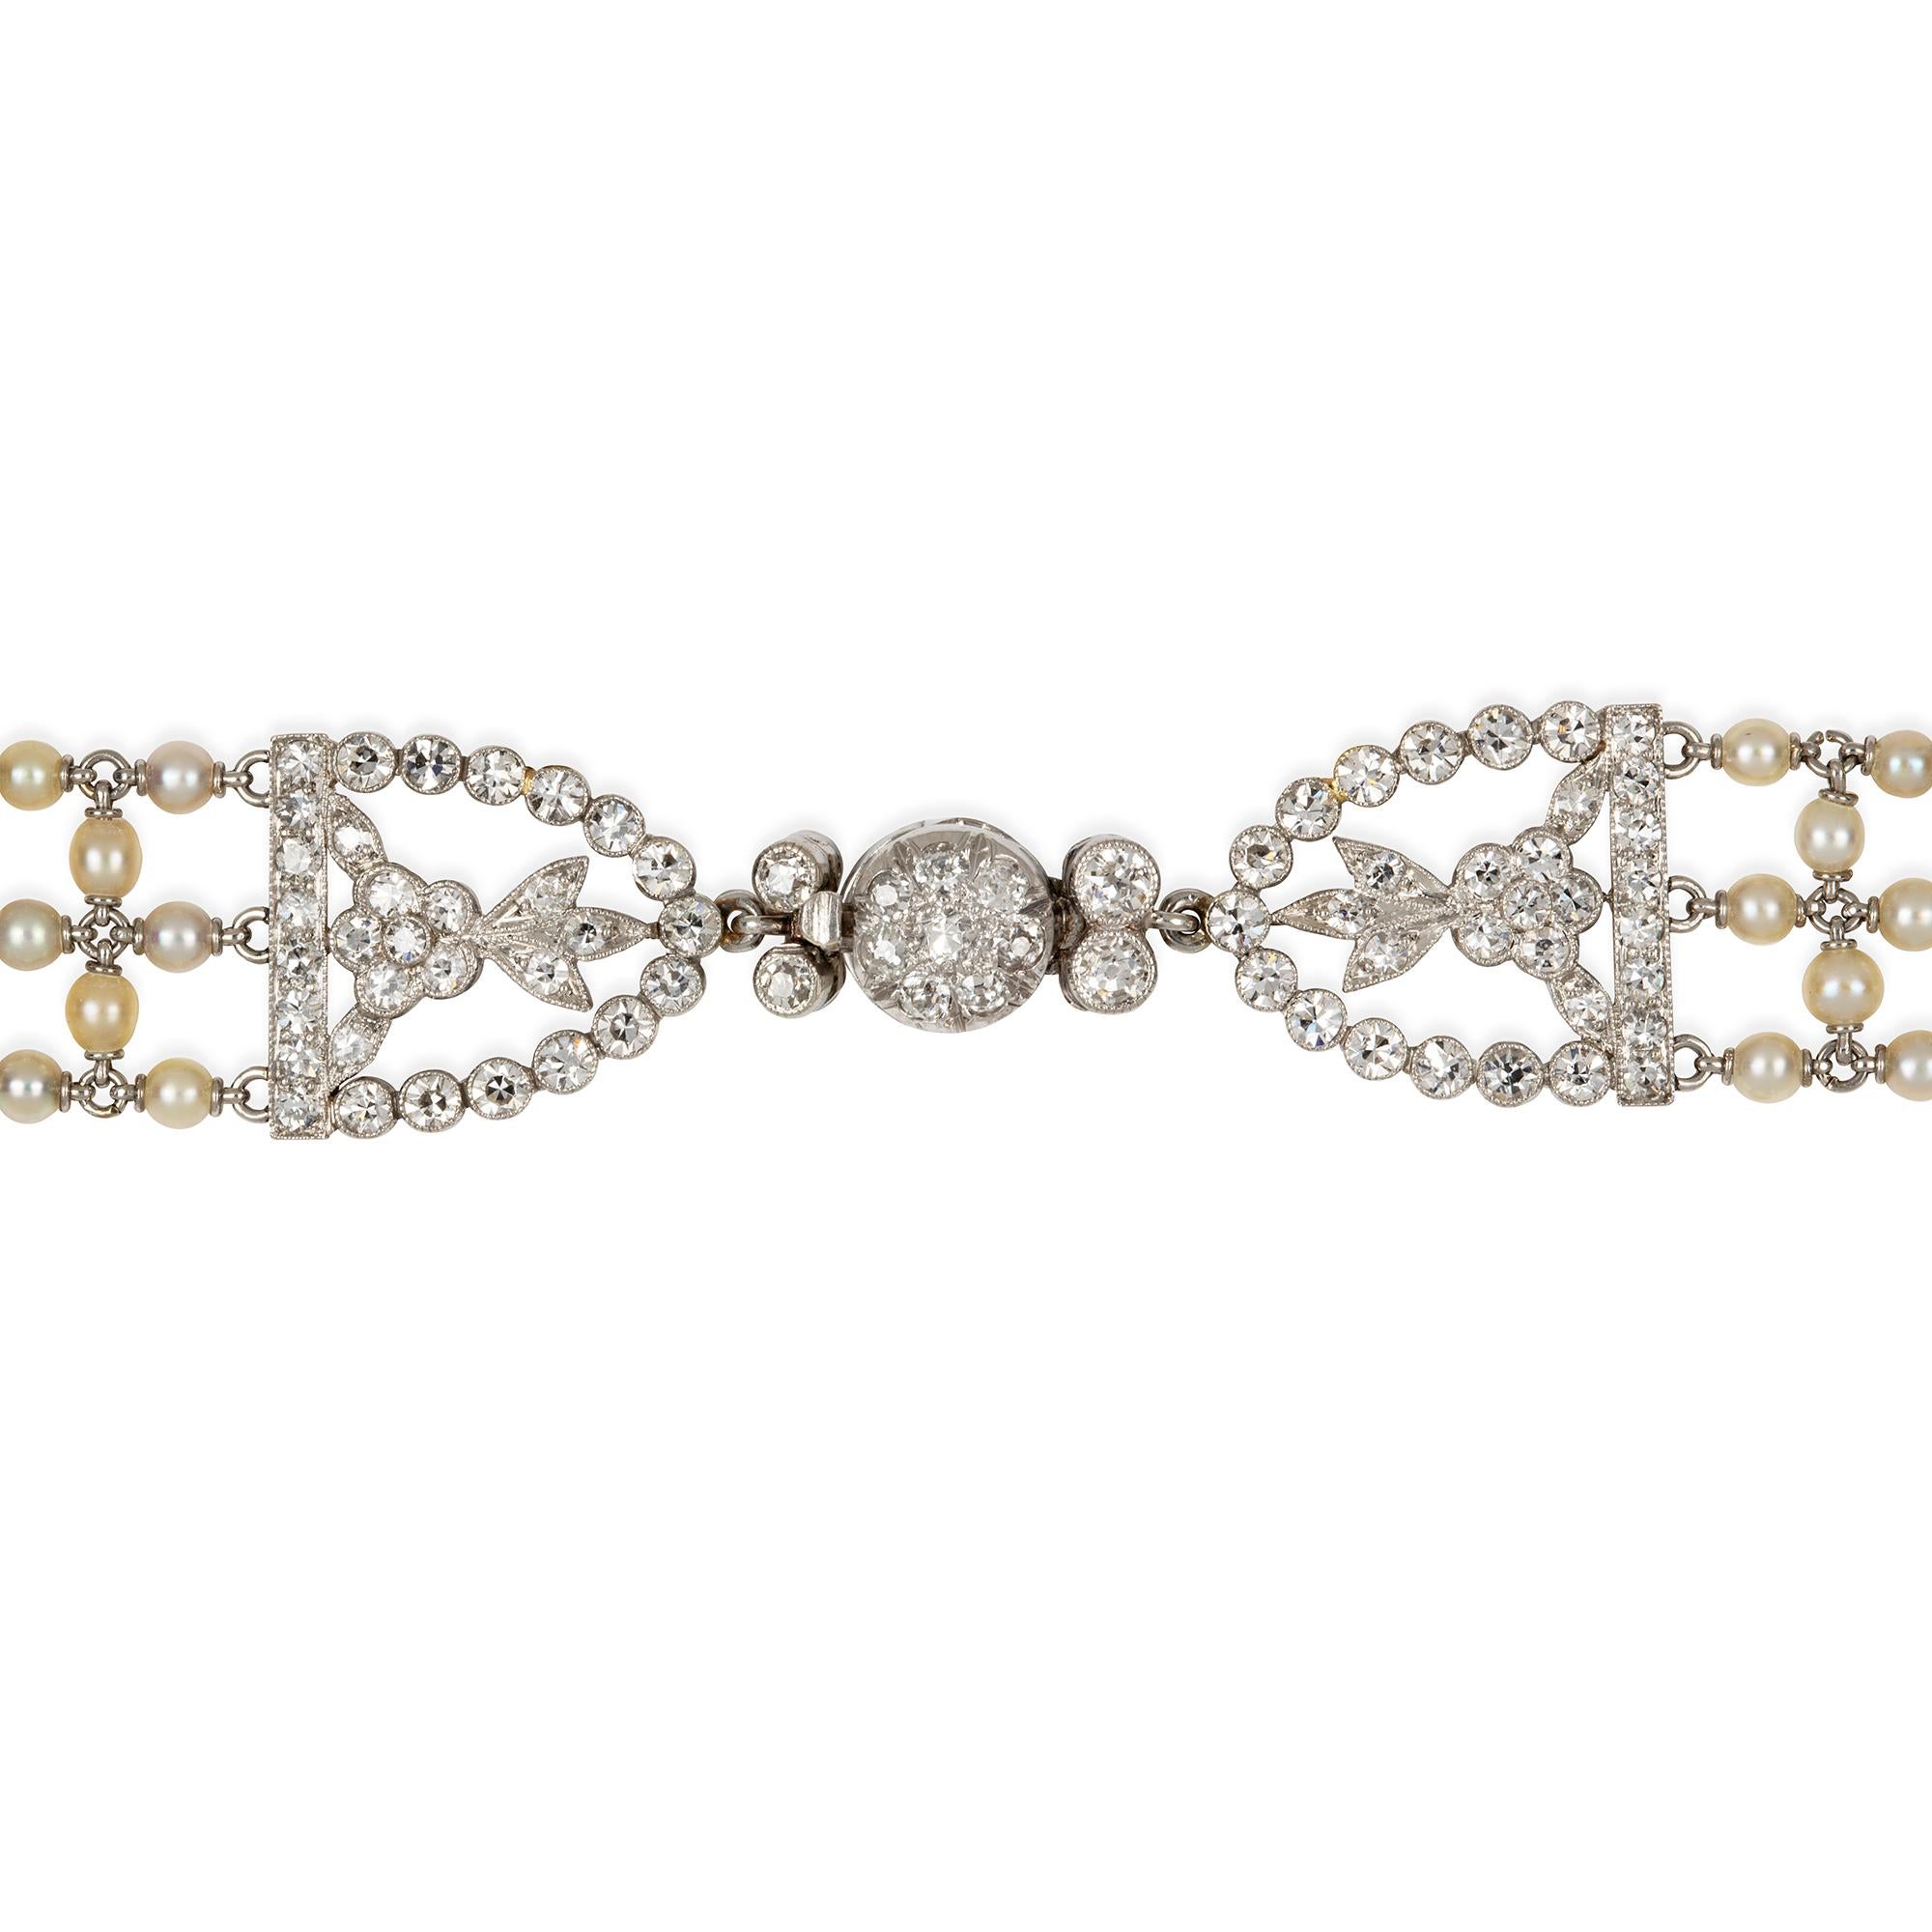 Belle Époque A Early Twentieth Century Seed Pearl and Diamond Choker